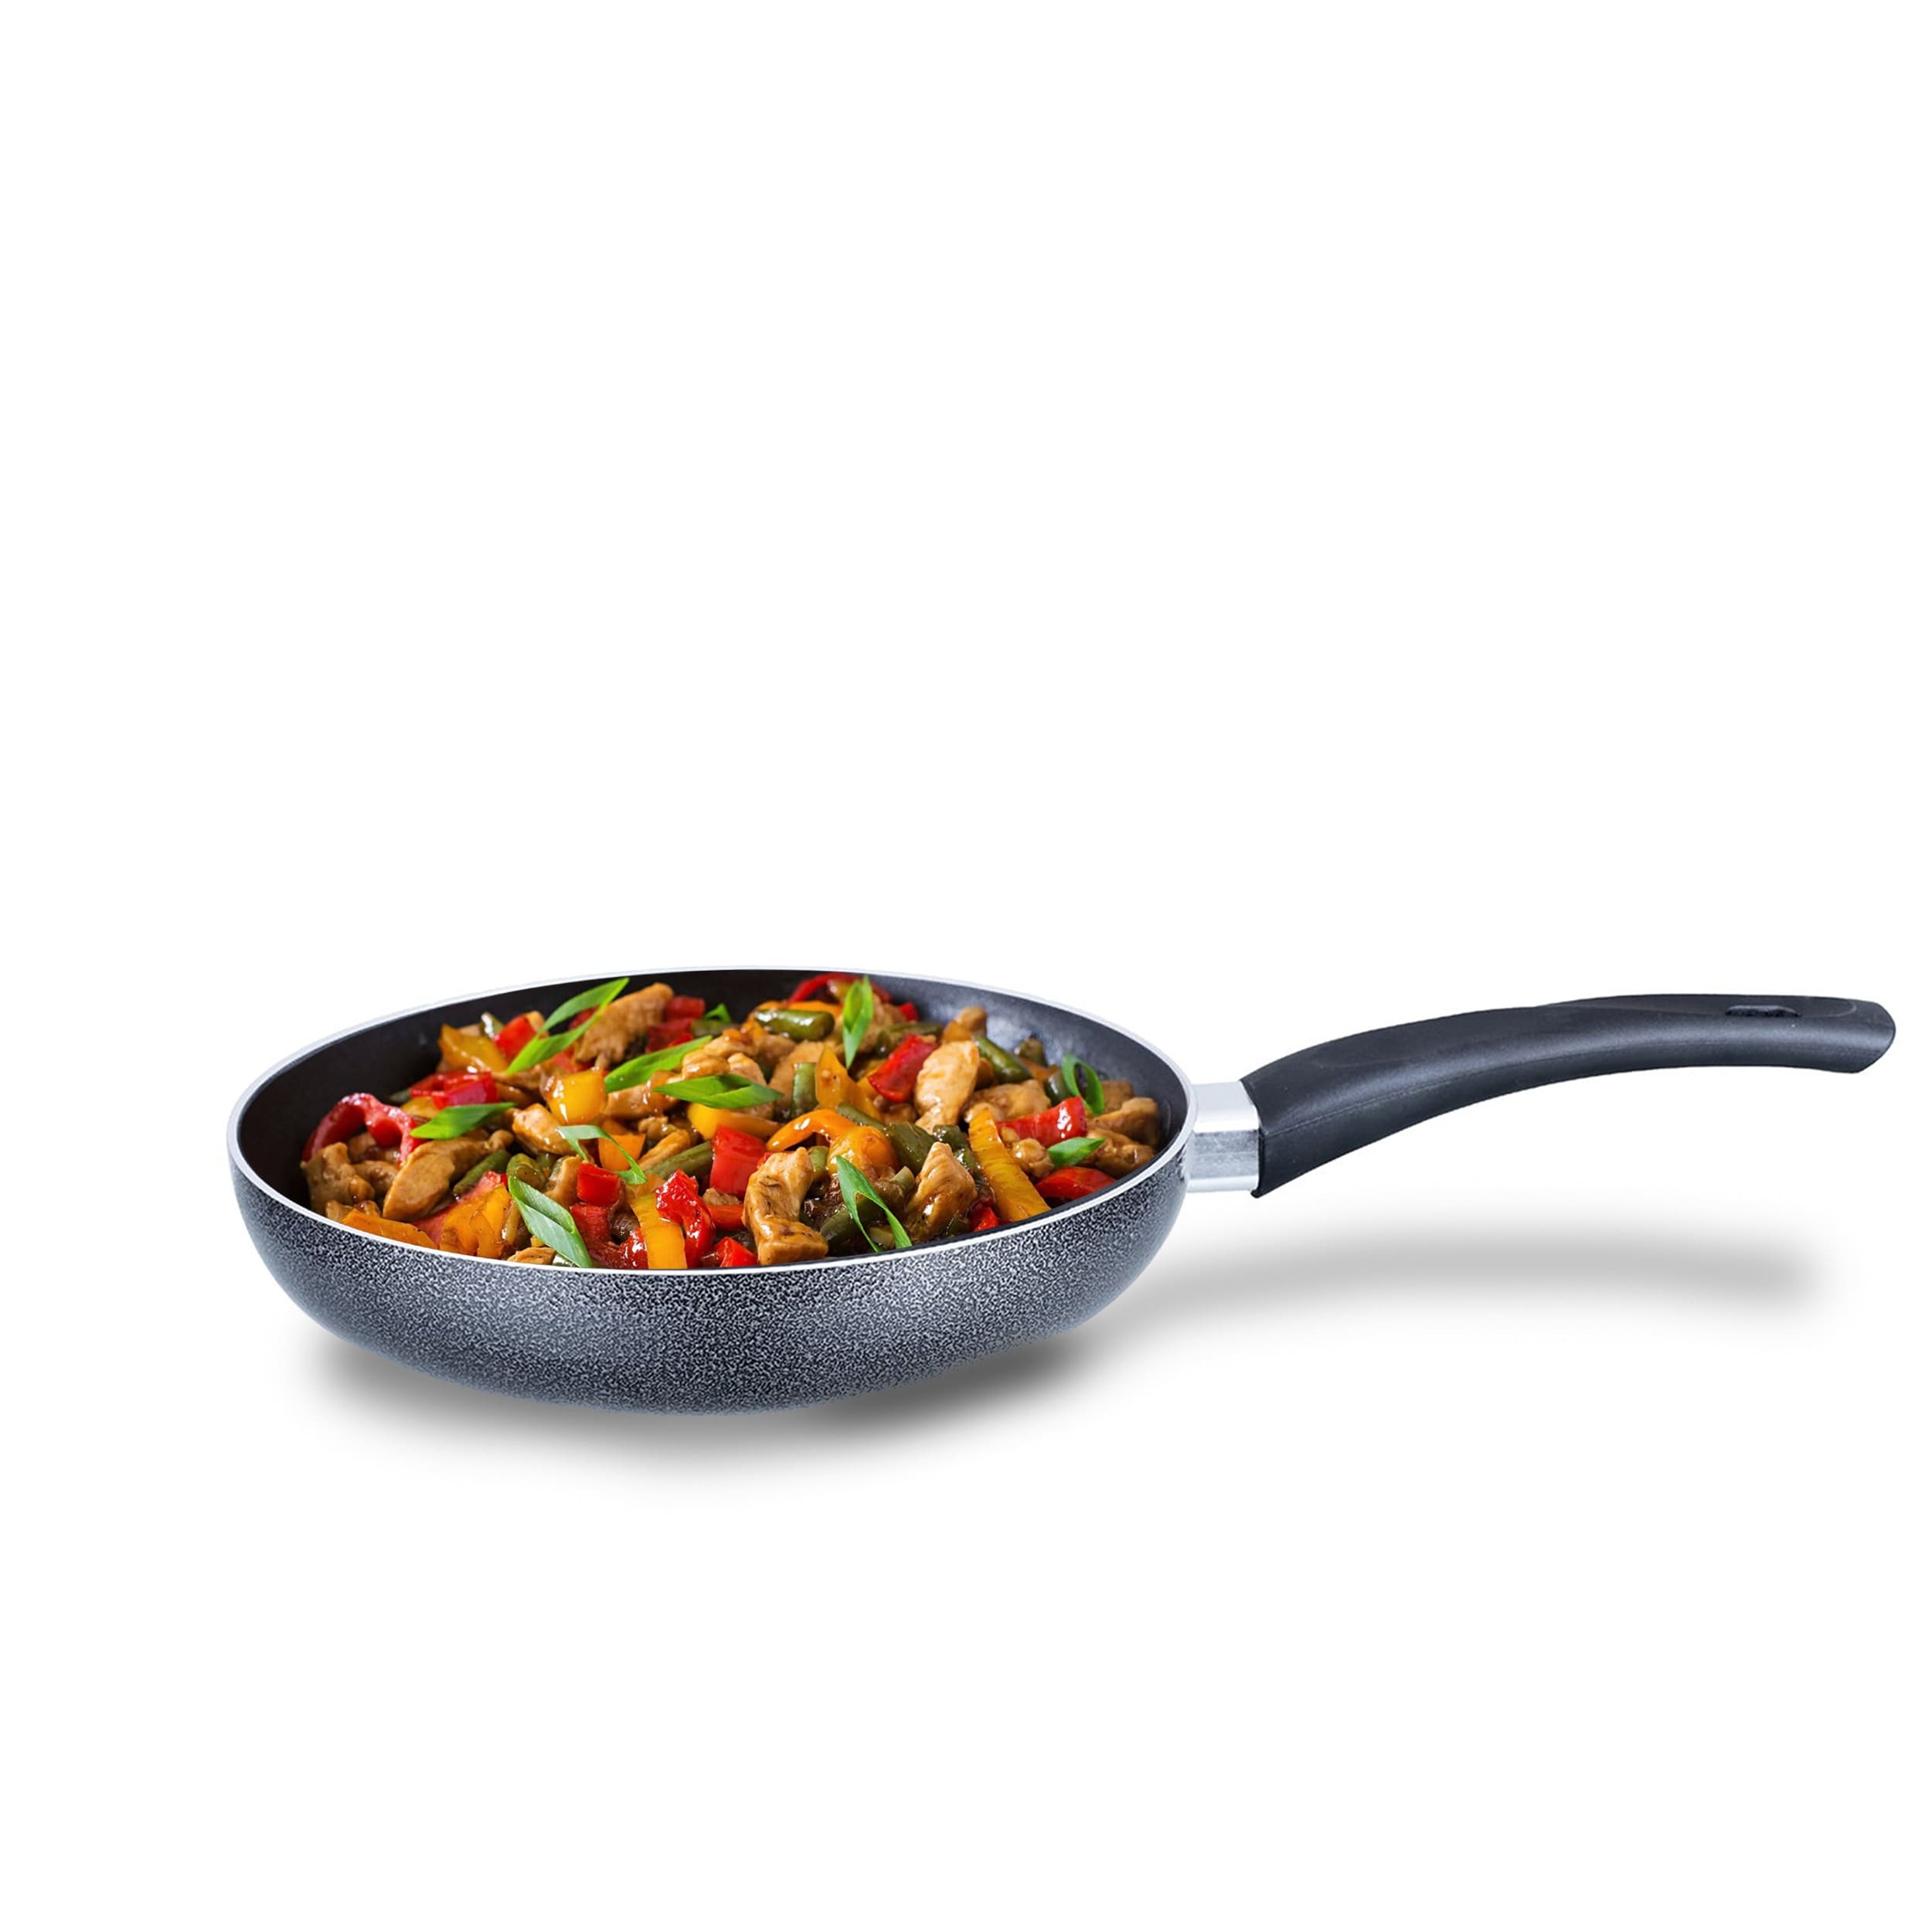 https://ak1.ostkcdn.com/images/products/is/images/direct/f67dae5fcda59d0e4f1b09b7dd3603a80d98638b/Brentwood-Frying-Pan-Aluminum-Non-Stick-8%22-Gray.jpg